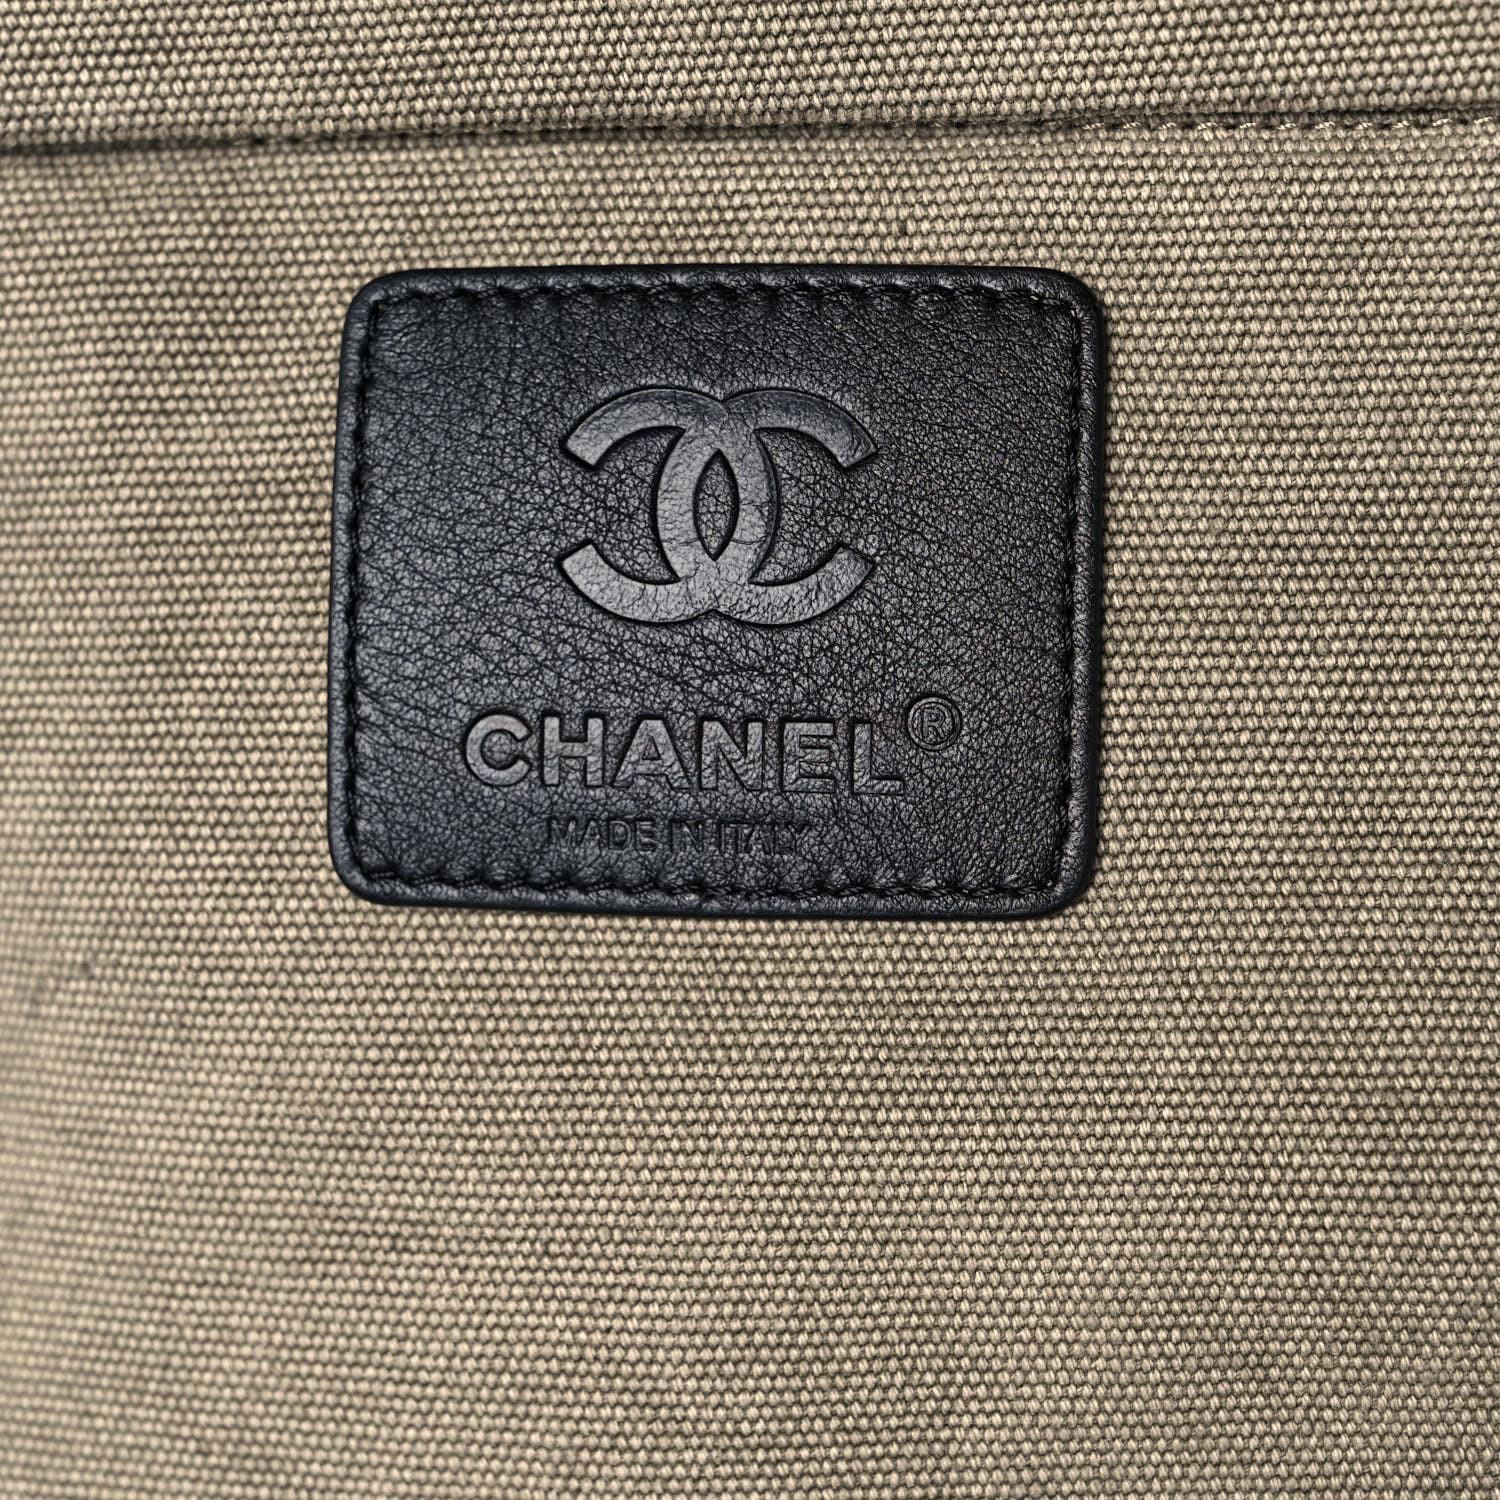 Chanel 2016 Chic Taupe Beige Travel Carry-On Trolley Luggage Bag Set of Two Bags For Sale 6